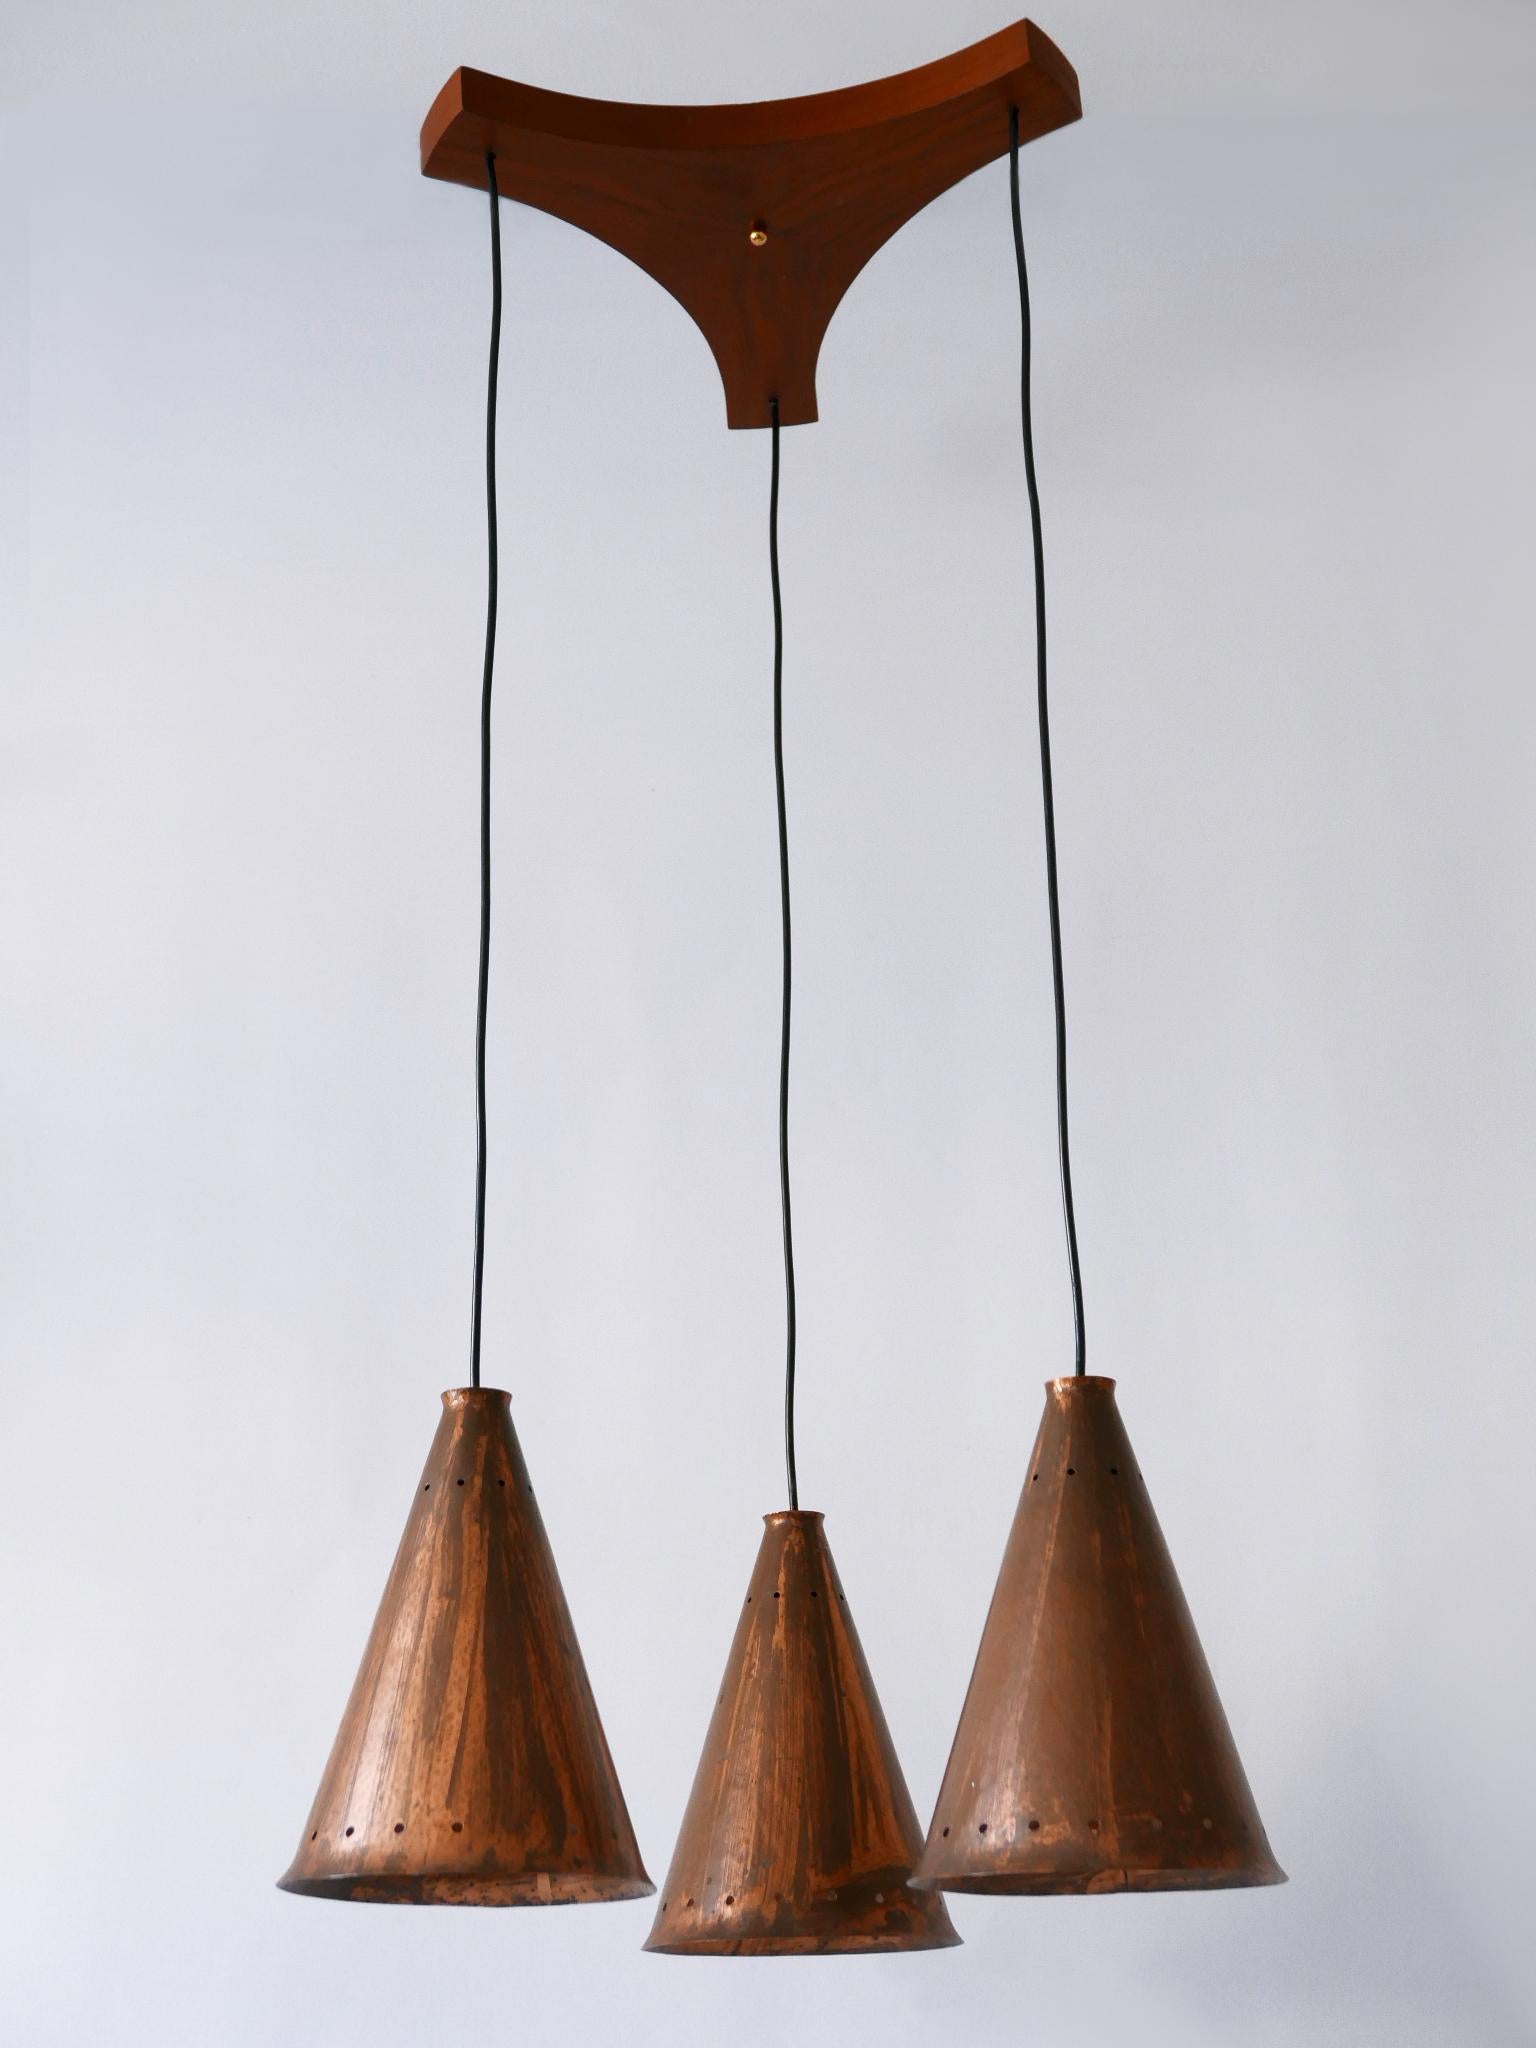 Exceptional & Large Mid-Century Modern Copper Pendant Lamp Scandinavia, 1950s In Good Condition For Sale In Munich, DE